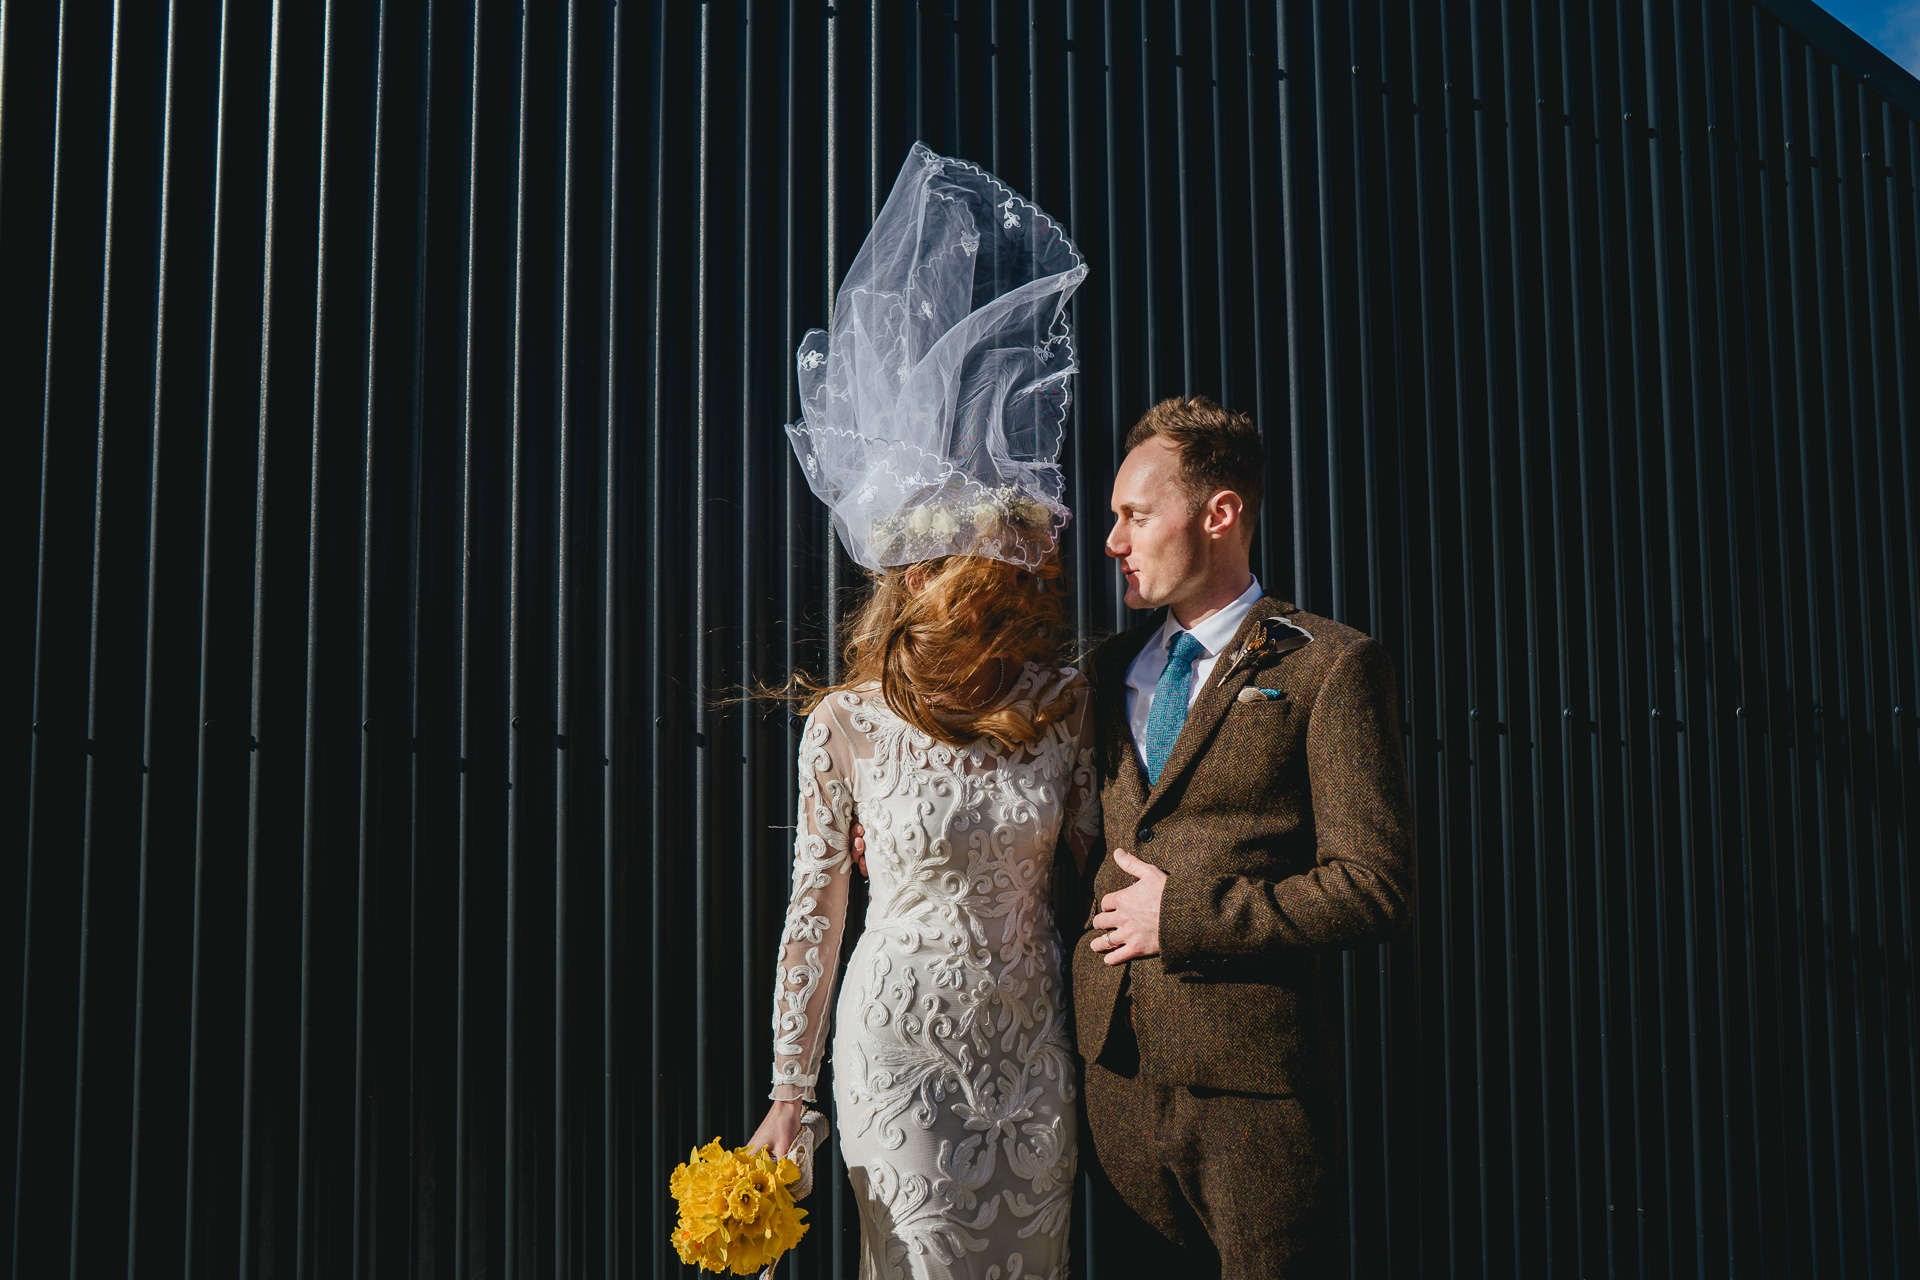 A bride and groom standing in front of a corrugated shed, with the bride's veil blowing in the wind